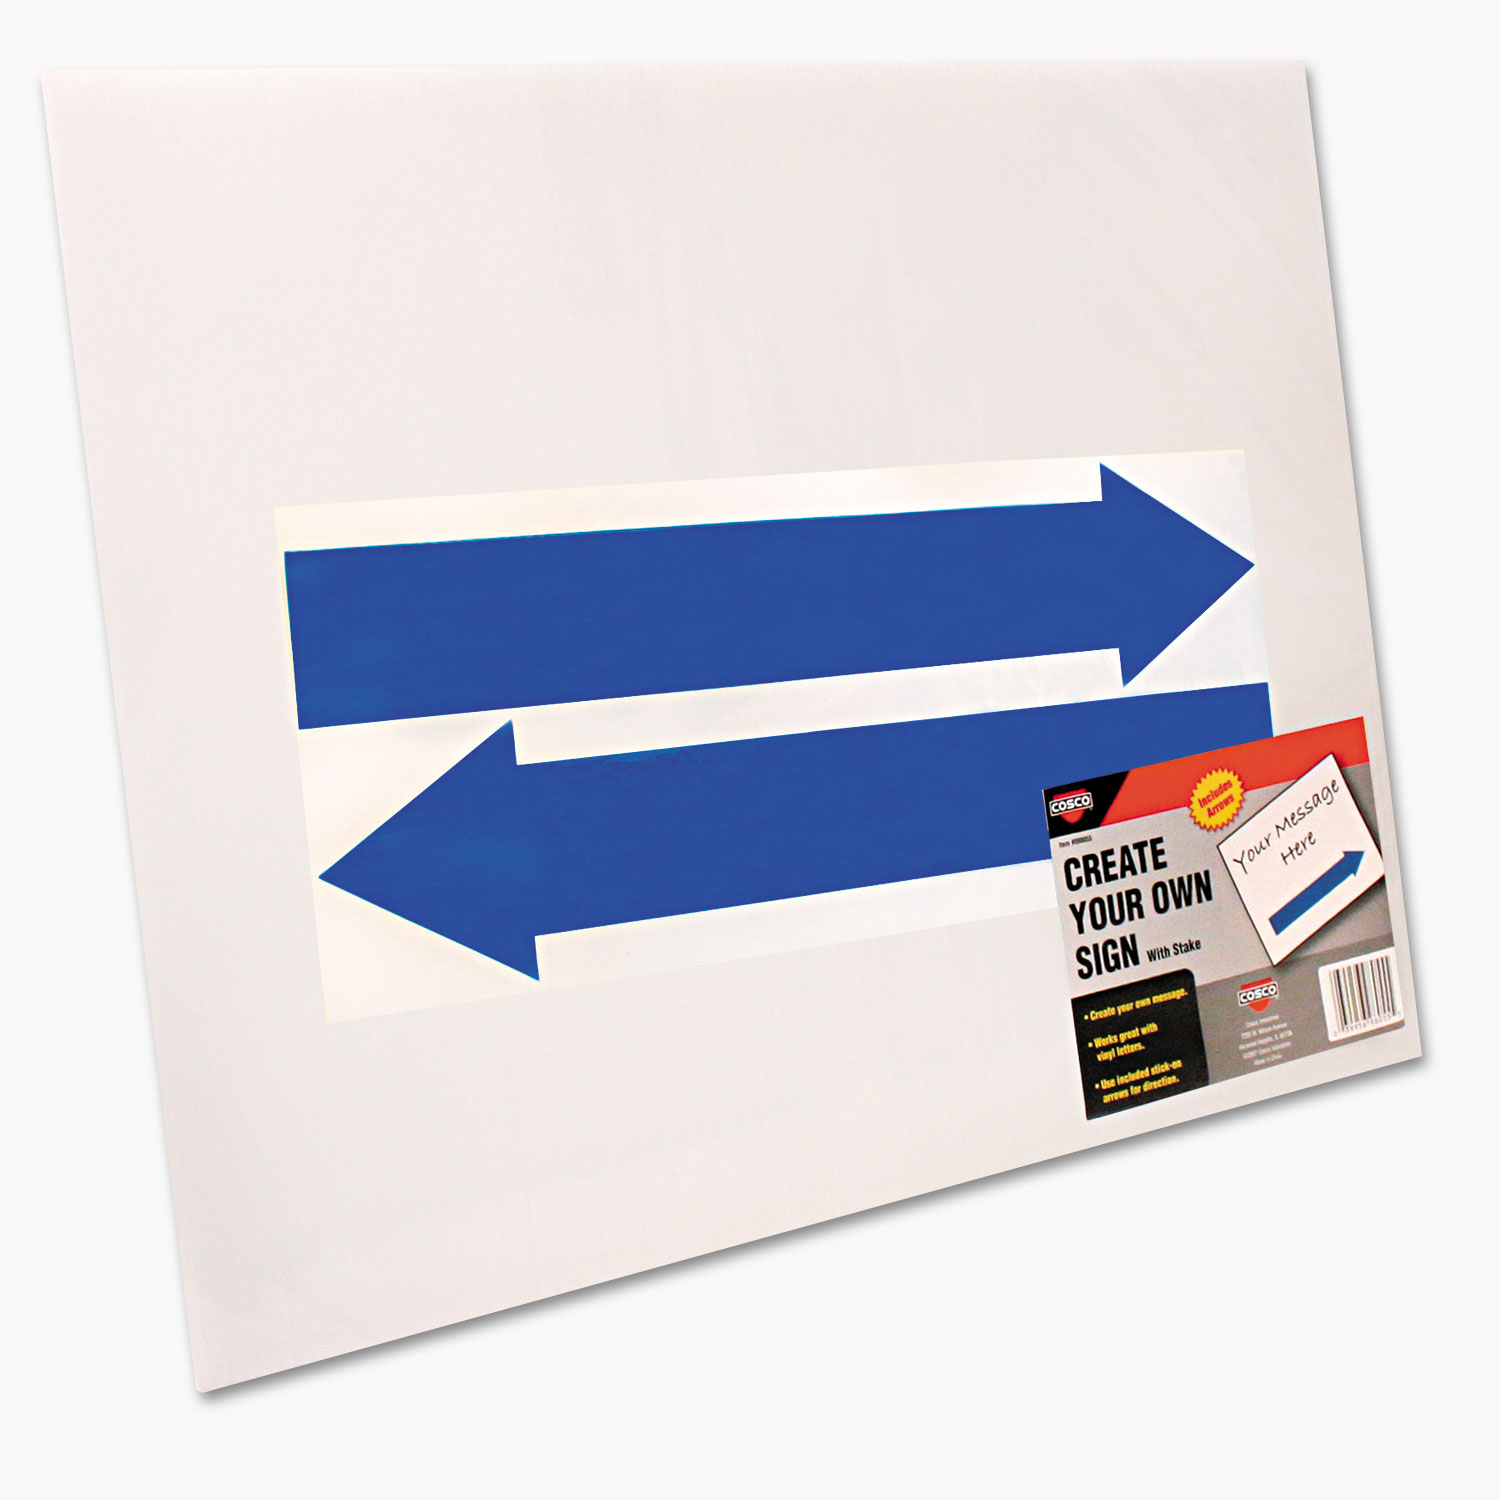  COSCO 098055 Stake Sign, Blank White, Includes Directional Arrows,  15 x 19 (COS098055) 